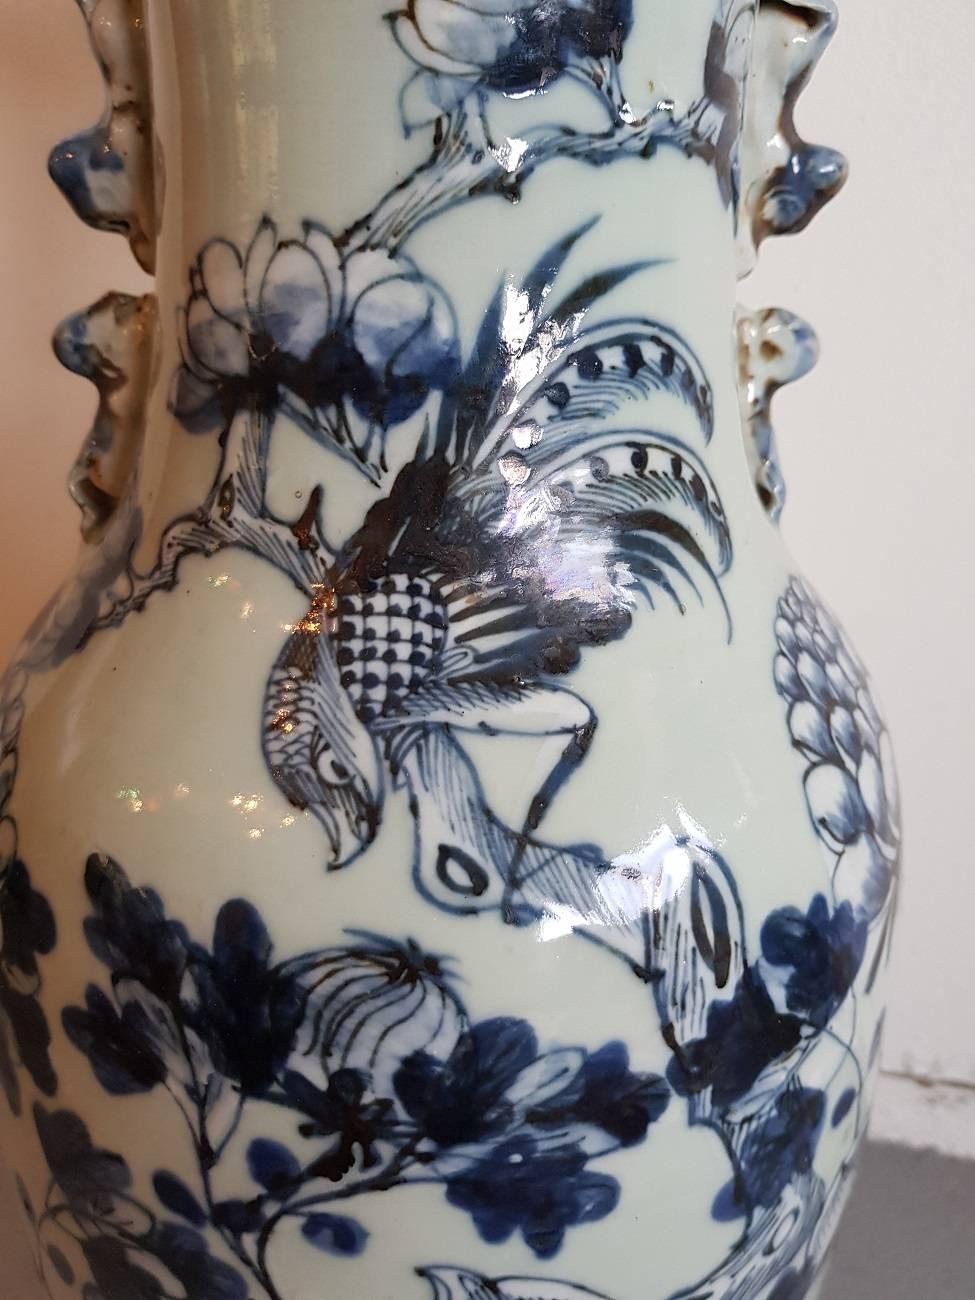 Chinese blue and white hand-painted porcelain vase from circa 1900, with a scene of two birds between a floral decor.
It has a hairline on the bottom but further in a good condition.

The measurements are,
Depth 24 cm/ 9.4 inch.
Width 24 cm/